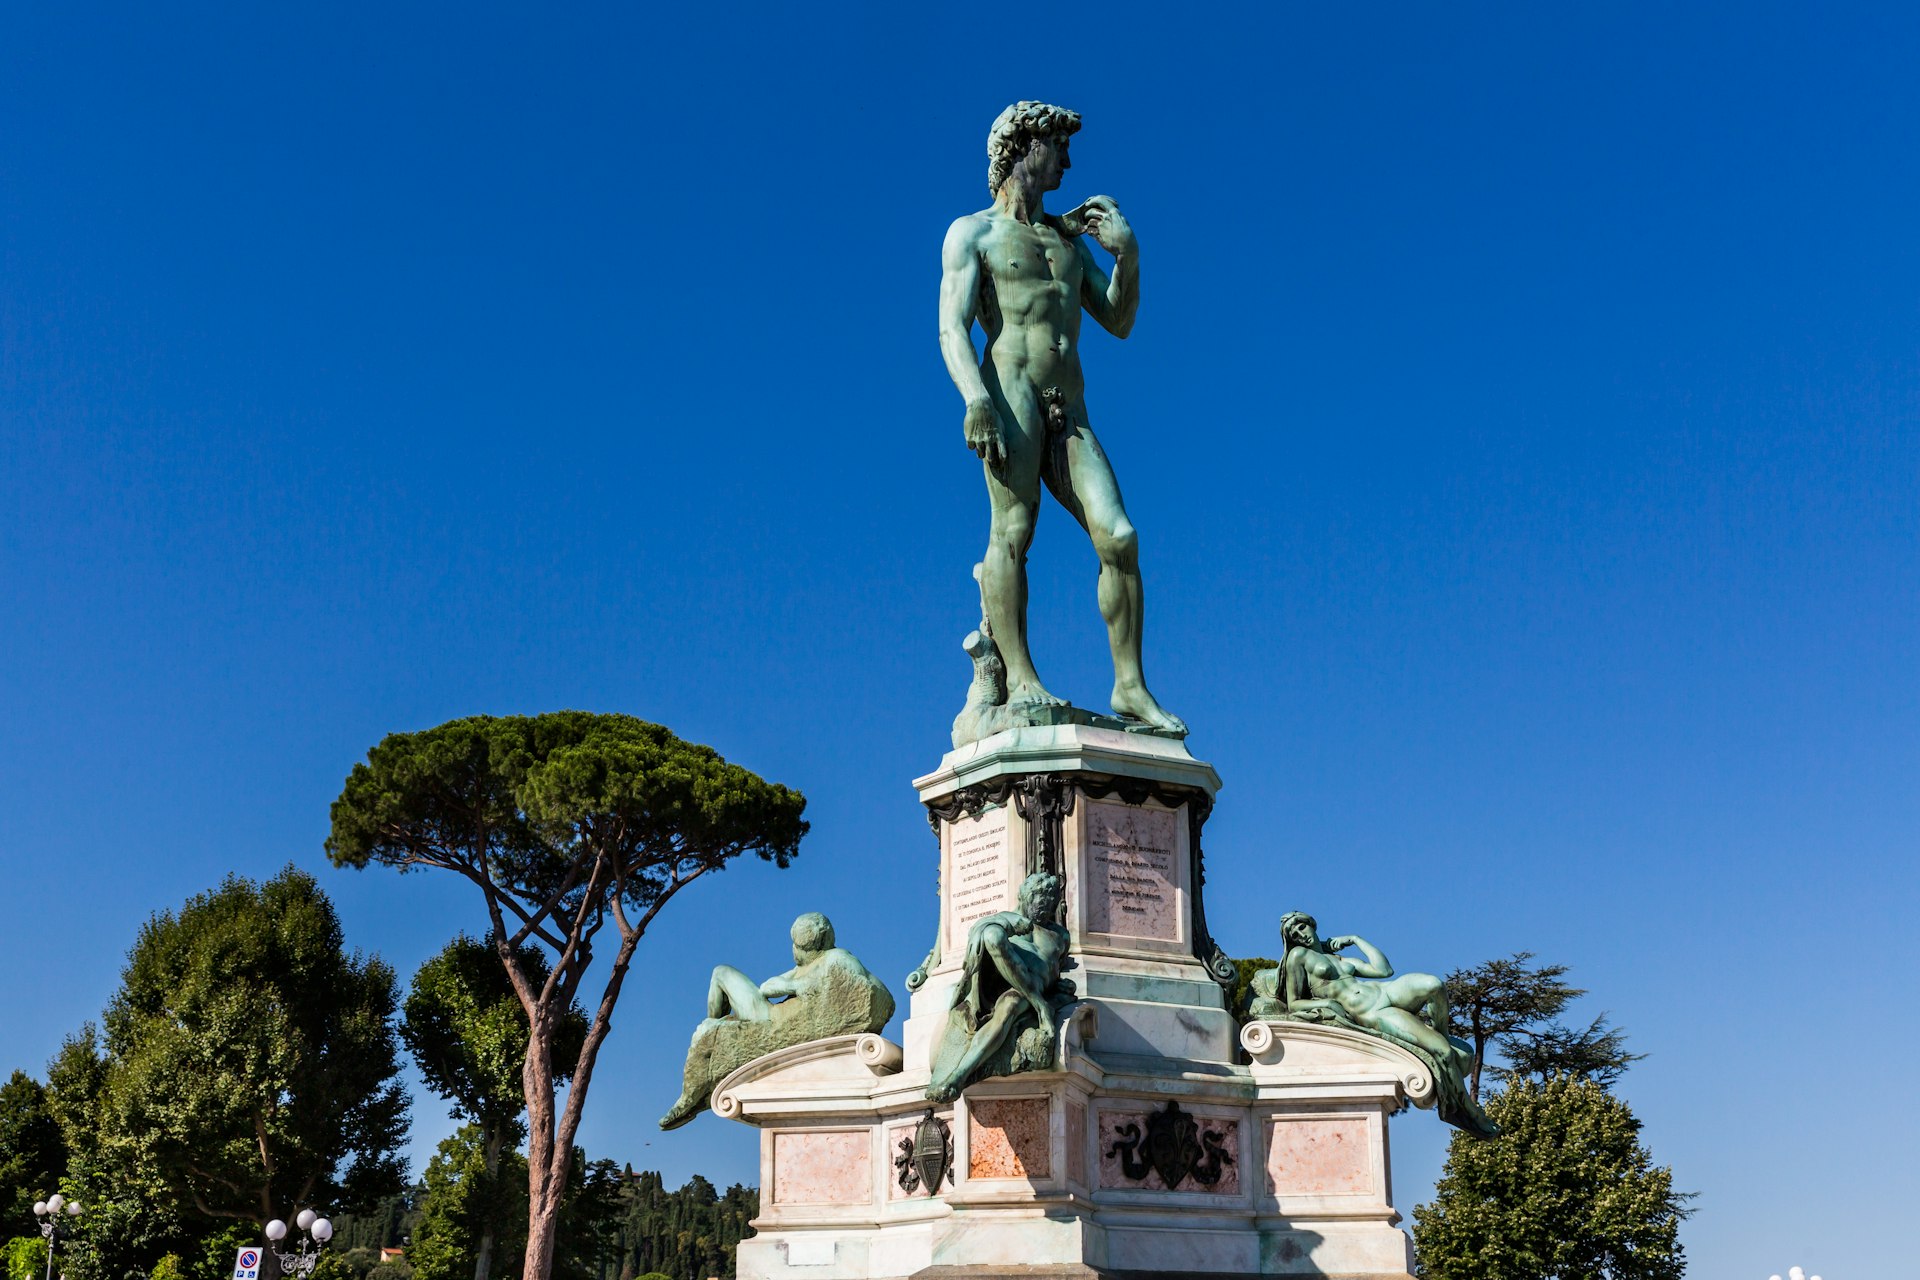 A replica statue of Michelangelo's "David," cast in bronze, stands on a plinth in Piazzale Michelangelo in Florence